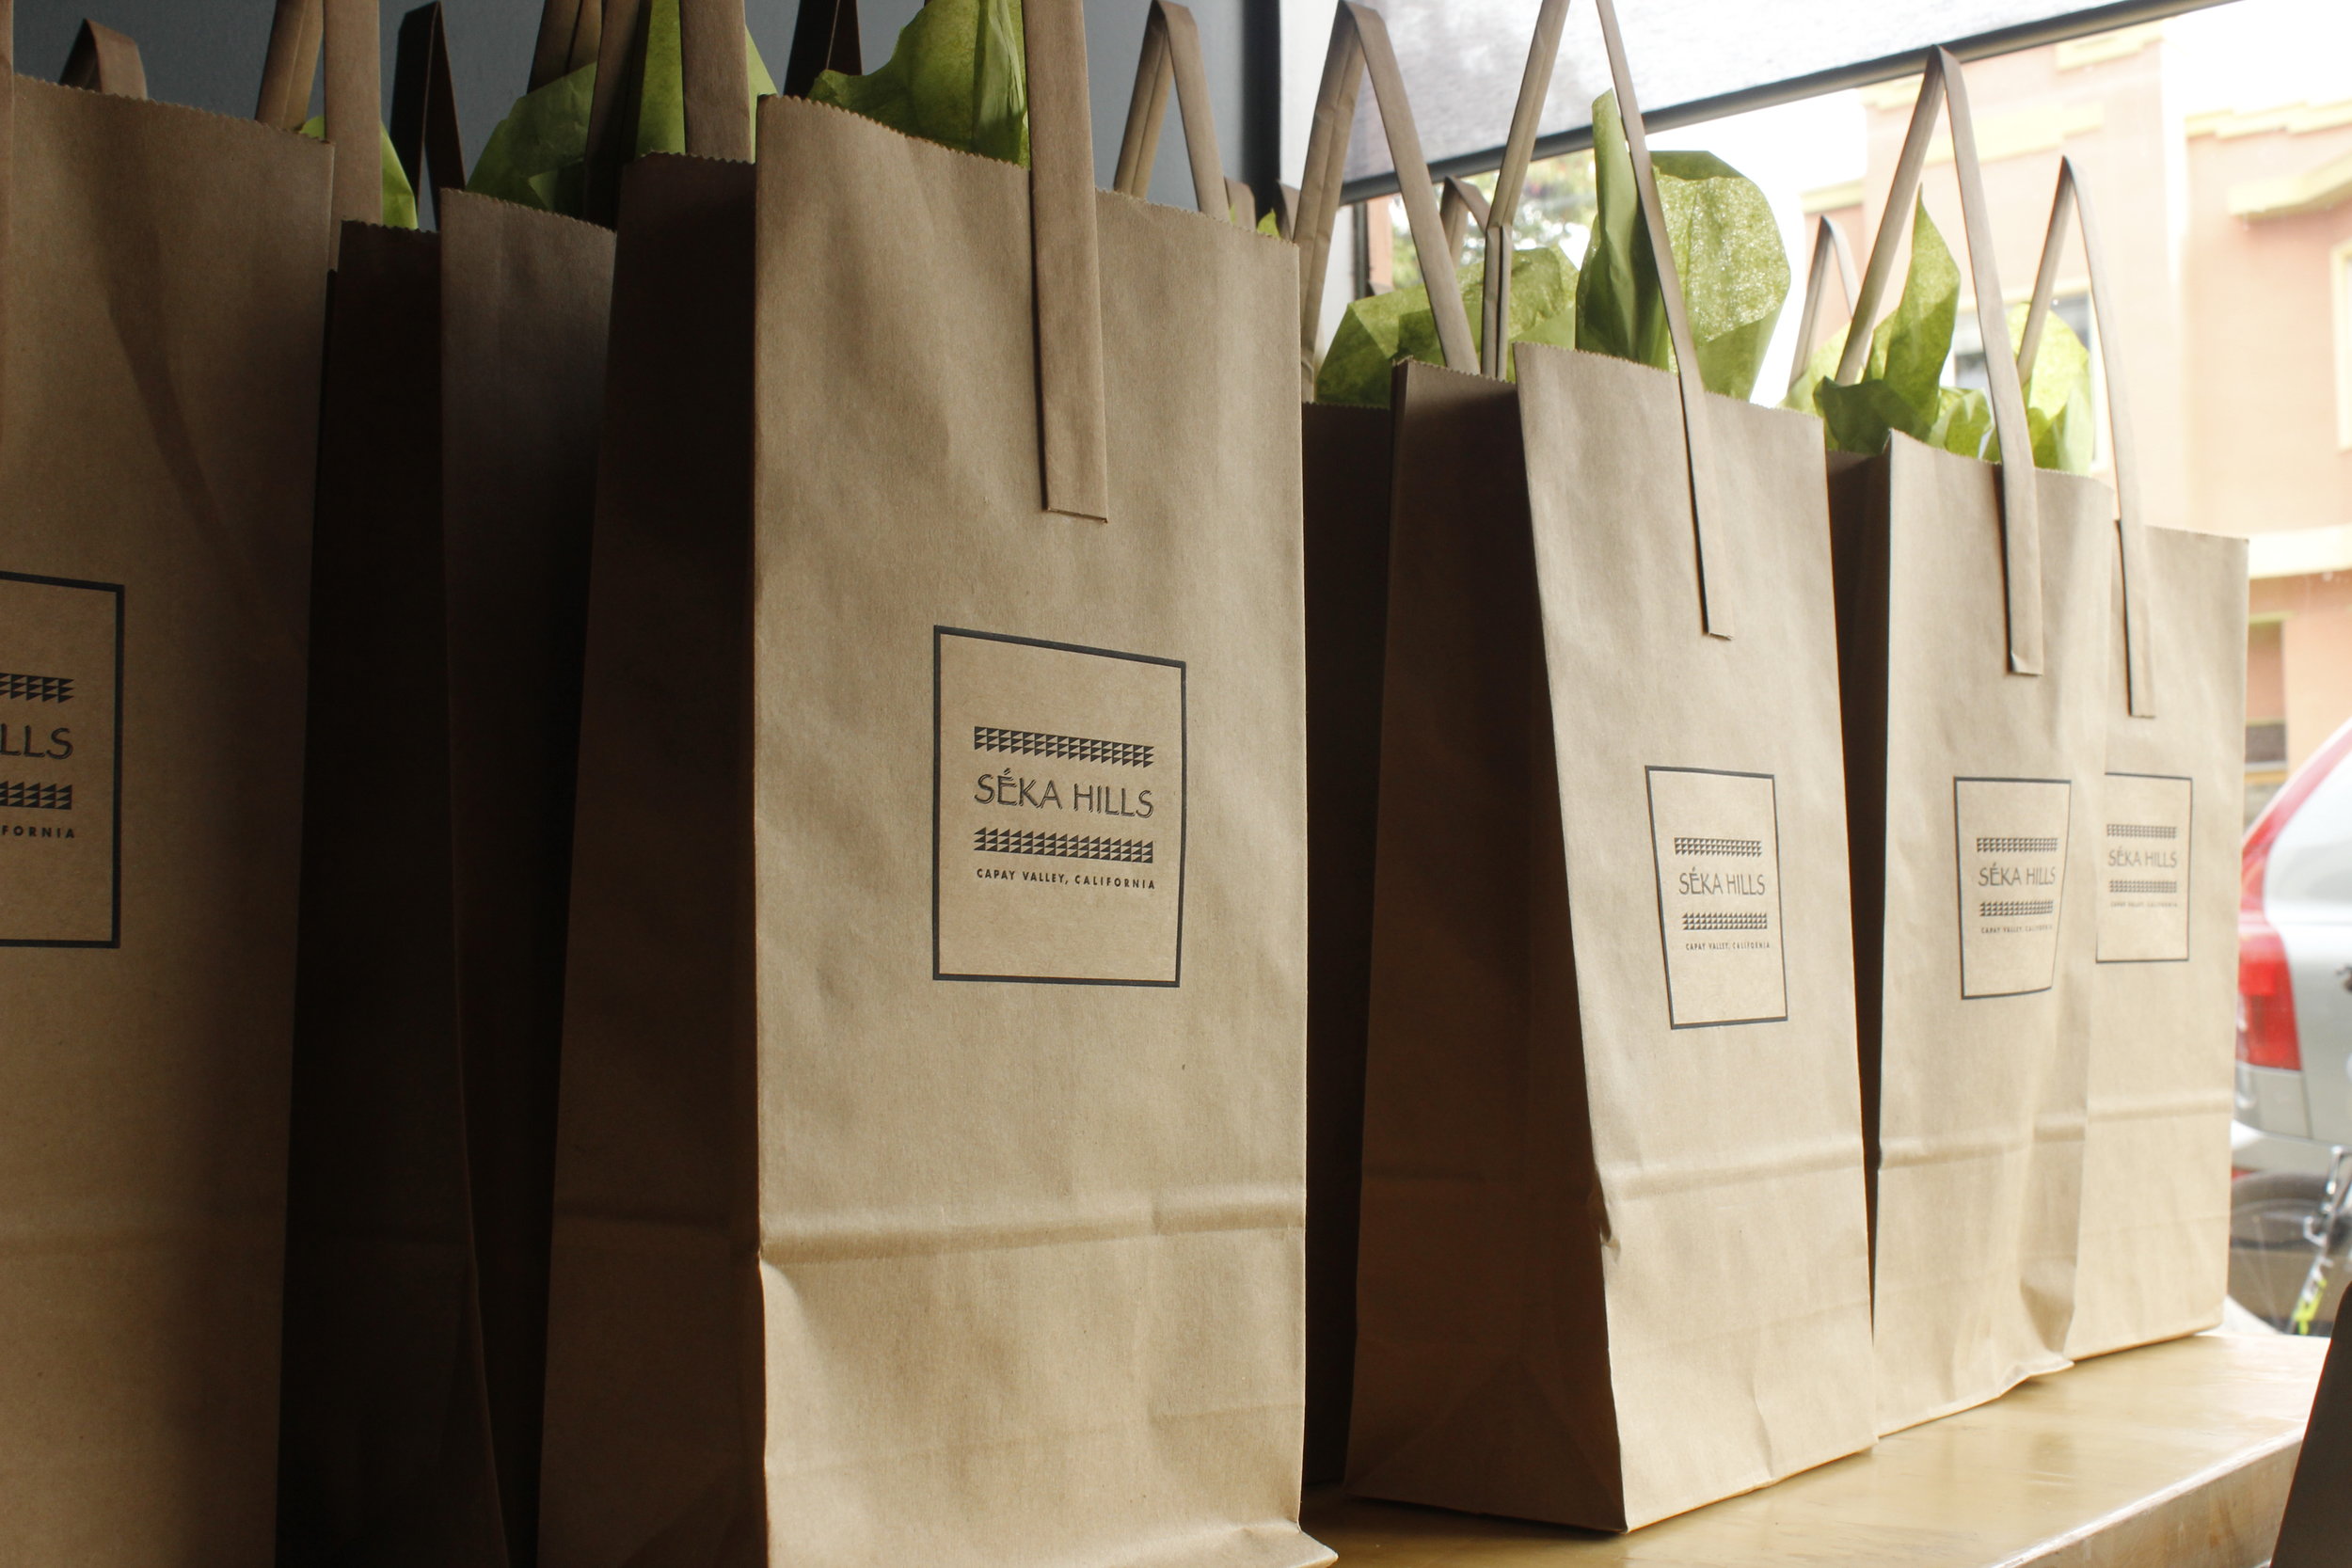  picture of seka hills brown paper bags 